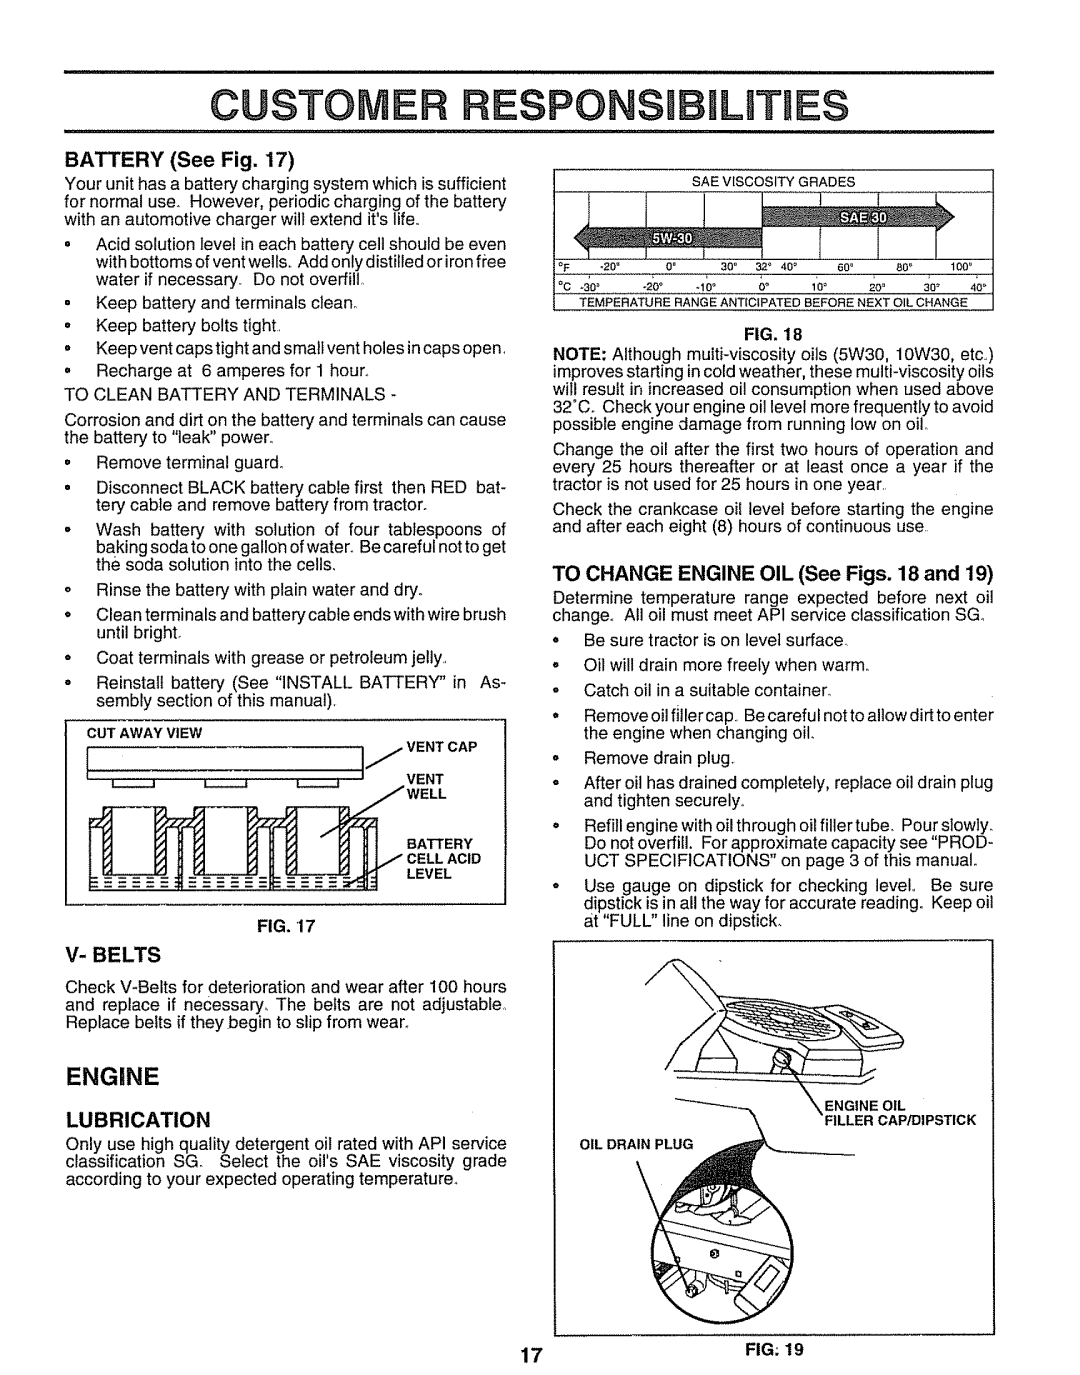 Sears 917.25597 Customlines, Ventcap, Engrne, BATTERY See Fig, Lubrication, TO CHANGE ENGINE OIL See Figs. 18 and 